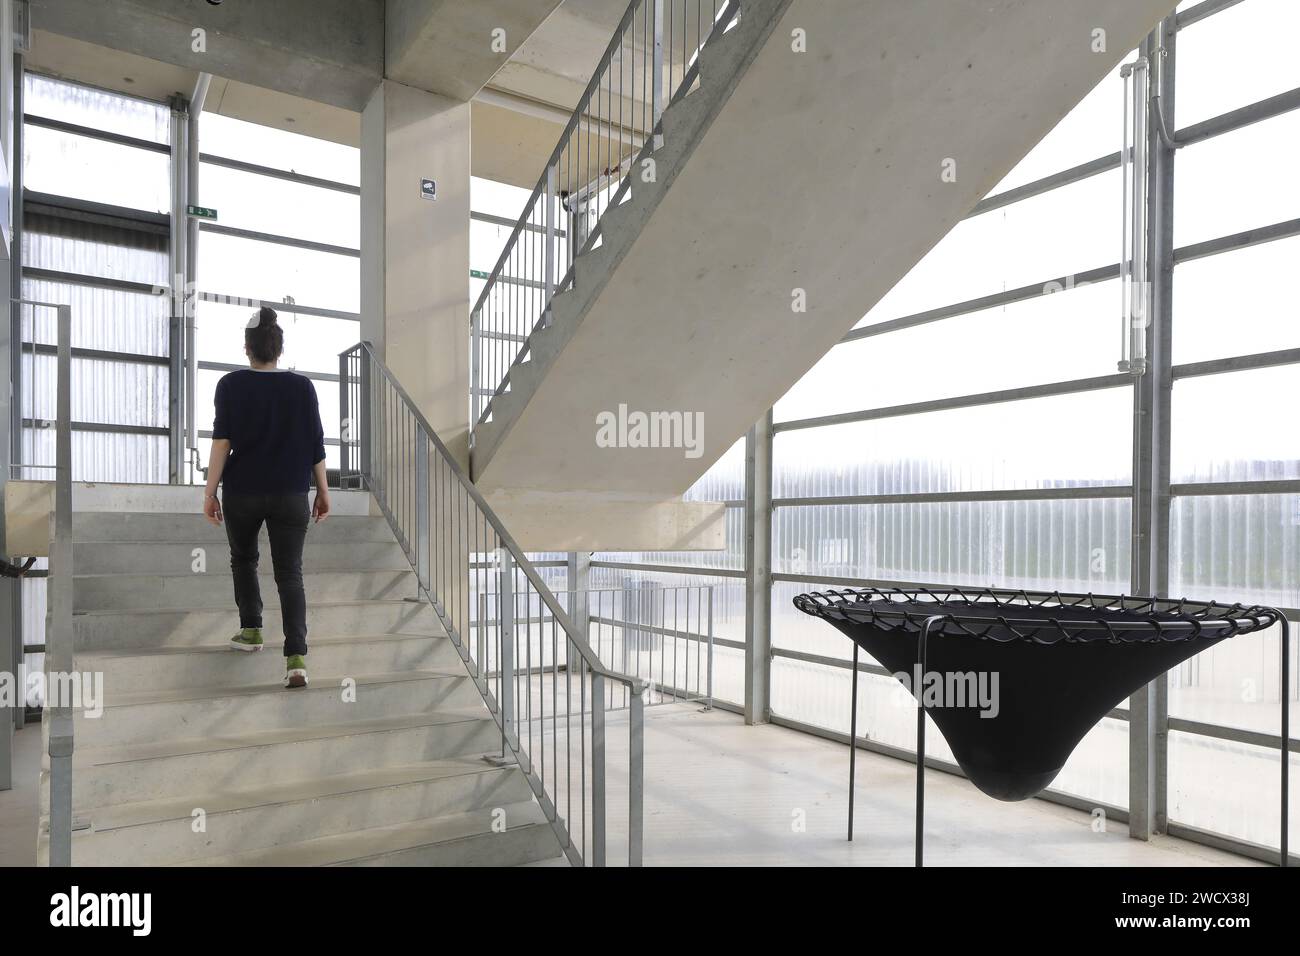 France, Nord, Dunkirk, FRAC Grand Large / Hauts-de-France designed by architects Lacaton & Vassal, staircase with on the right a work by the Venezuelan artist Angyvir Padilla Stock Photo